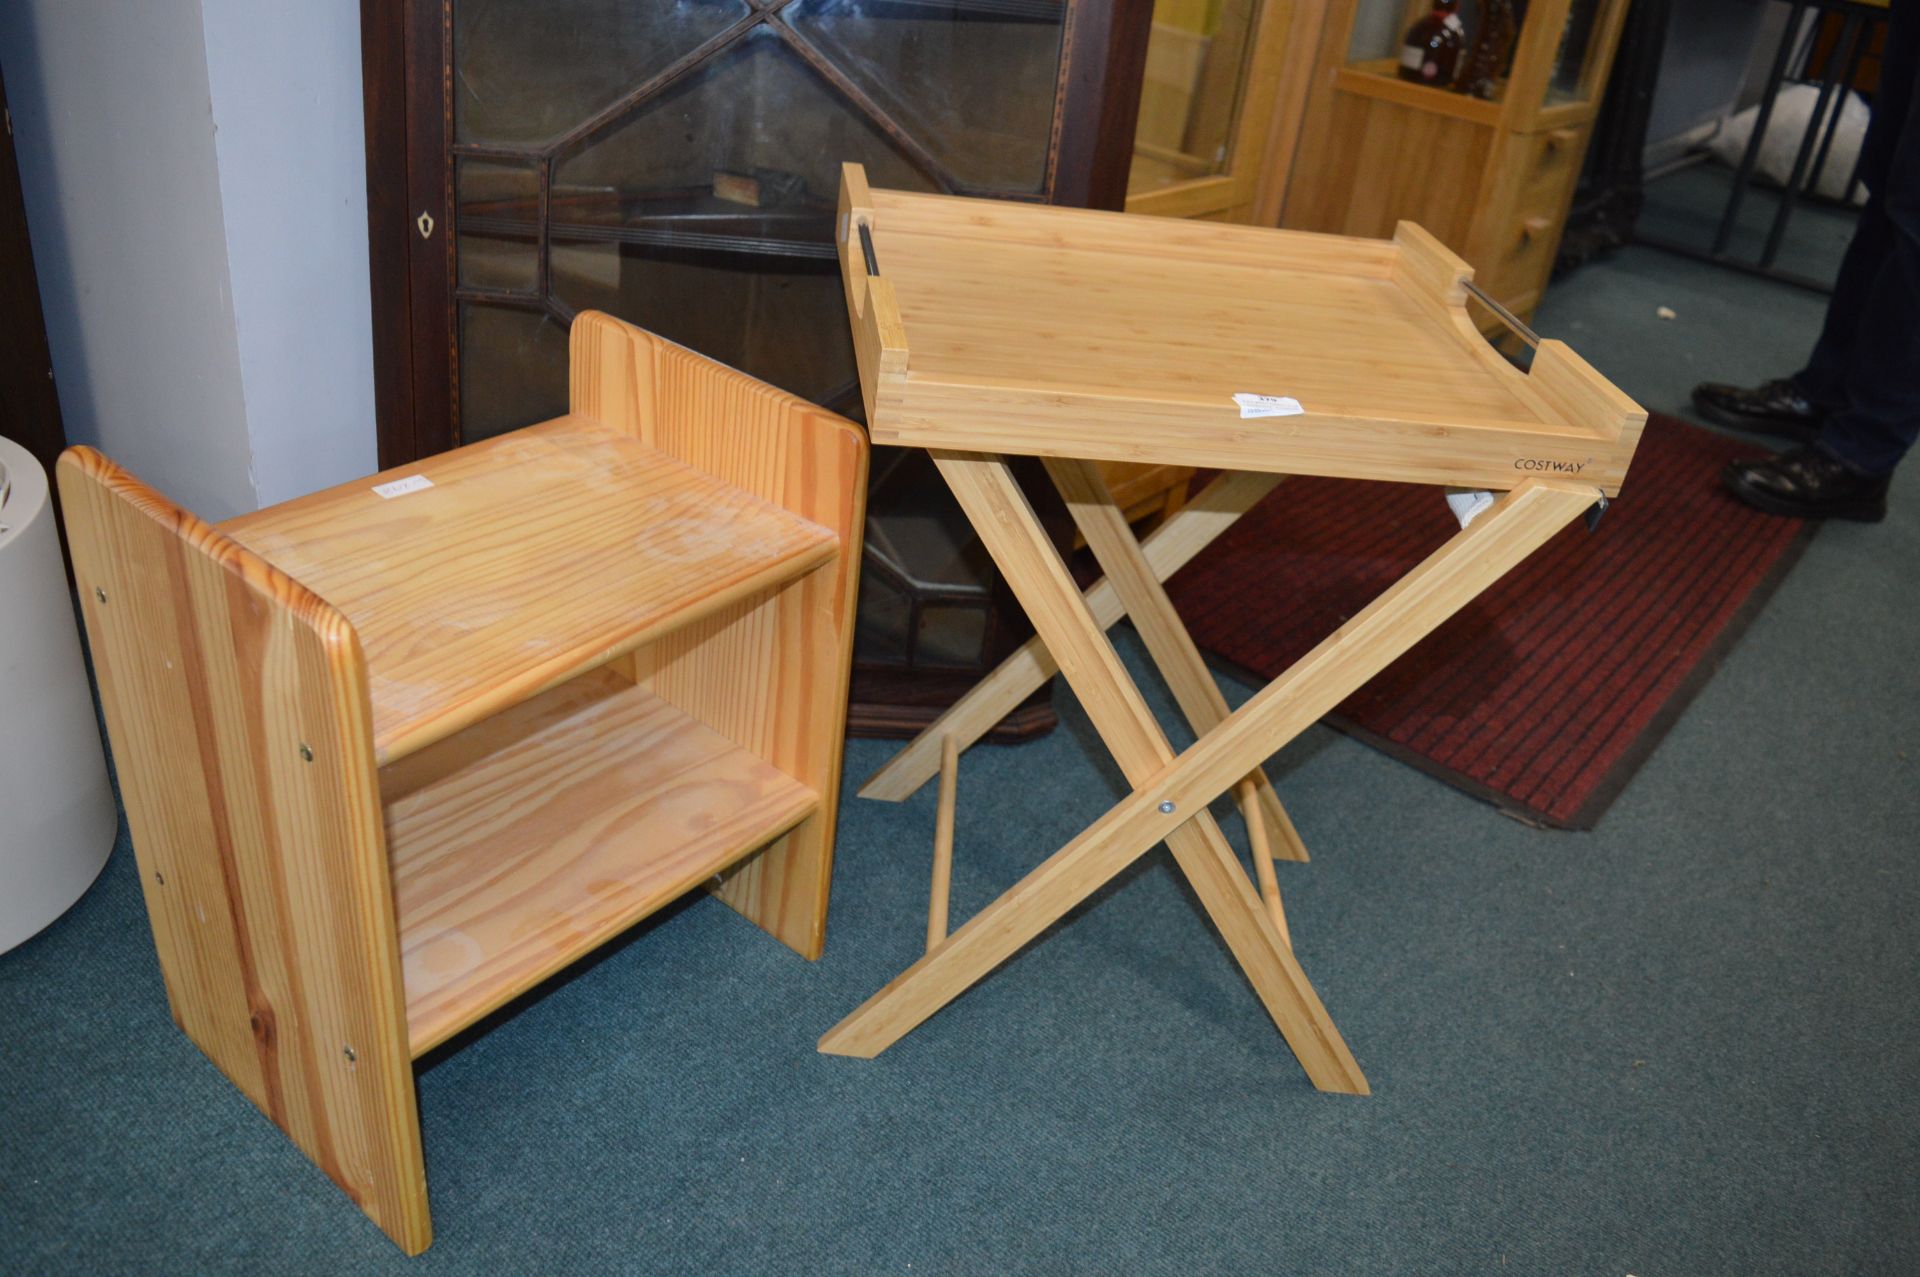 Folding Tray Table and a Small Pine Shelf Unit